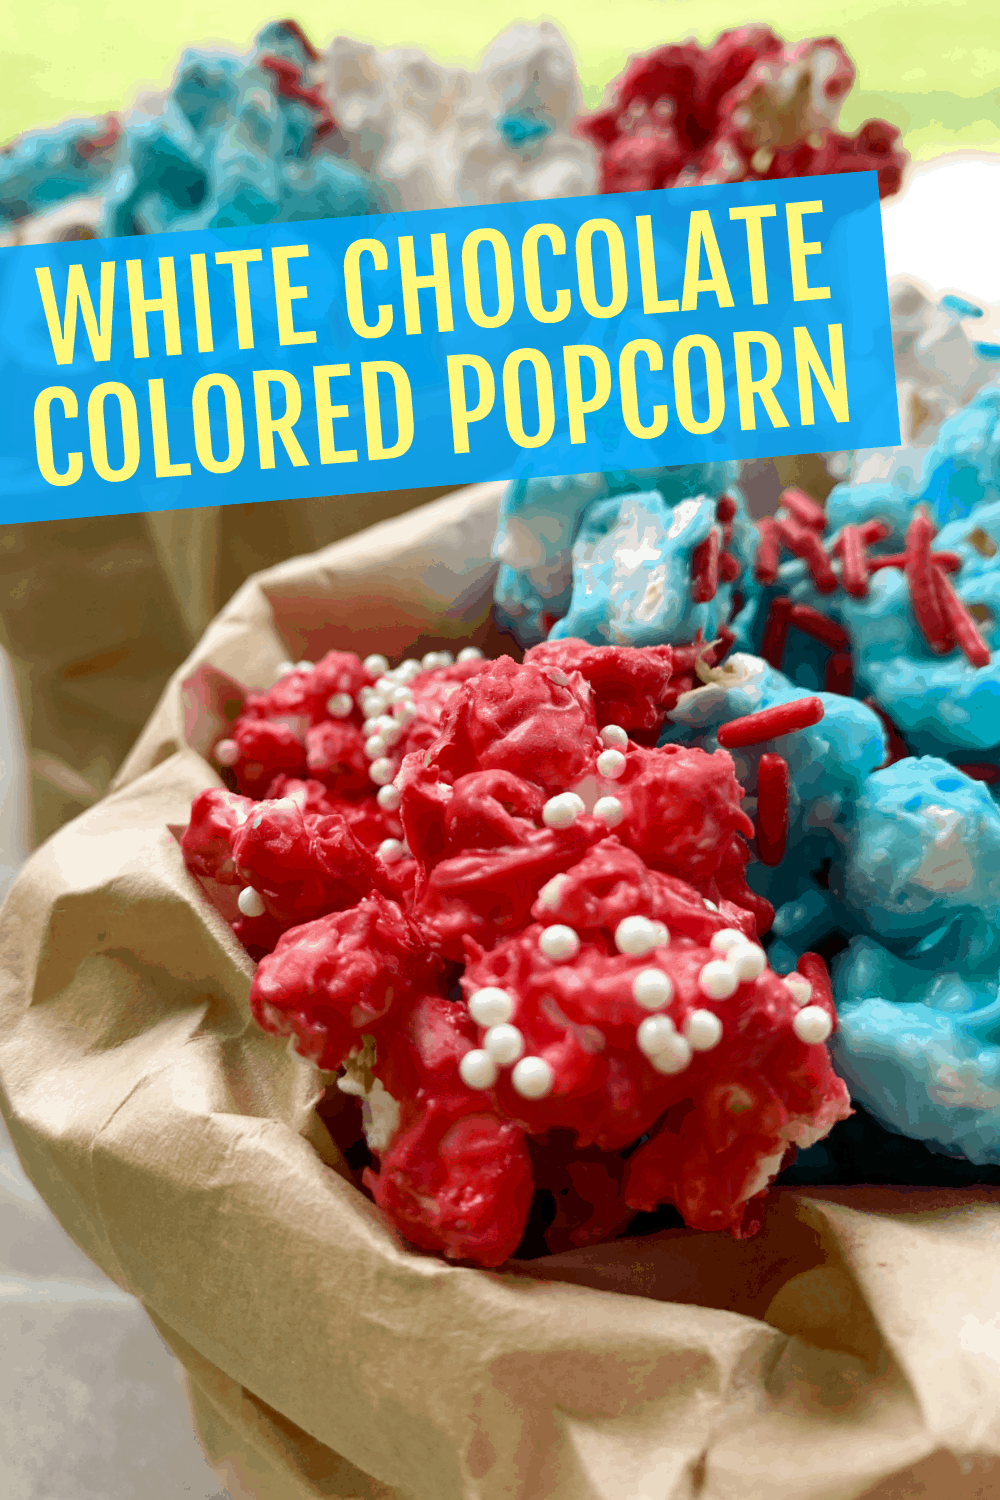 white chocolate covered popcorn in red white and blue colors in a brown paper bag